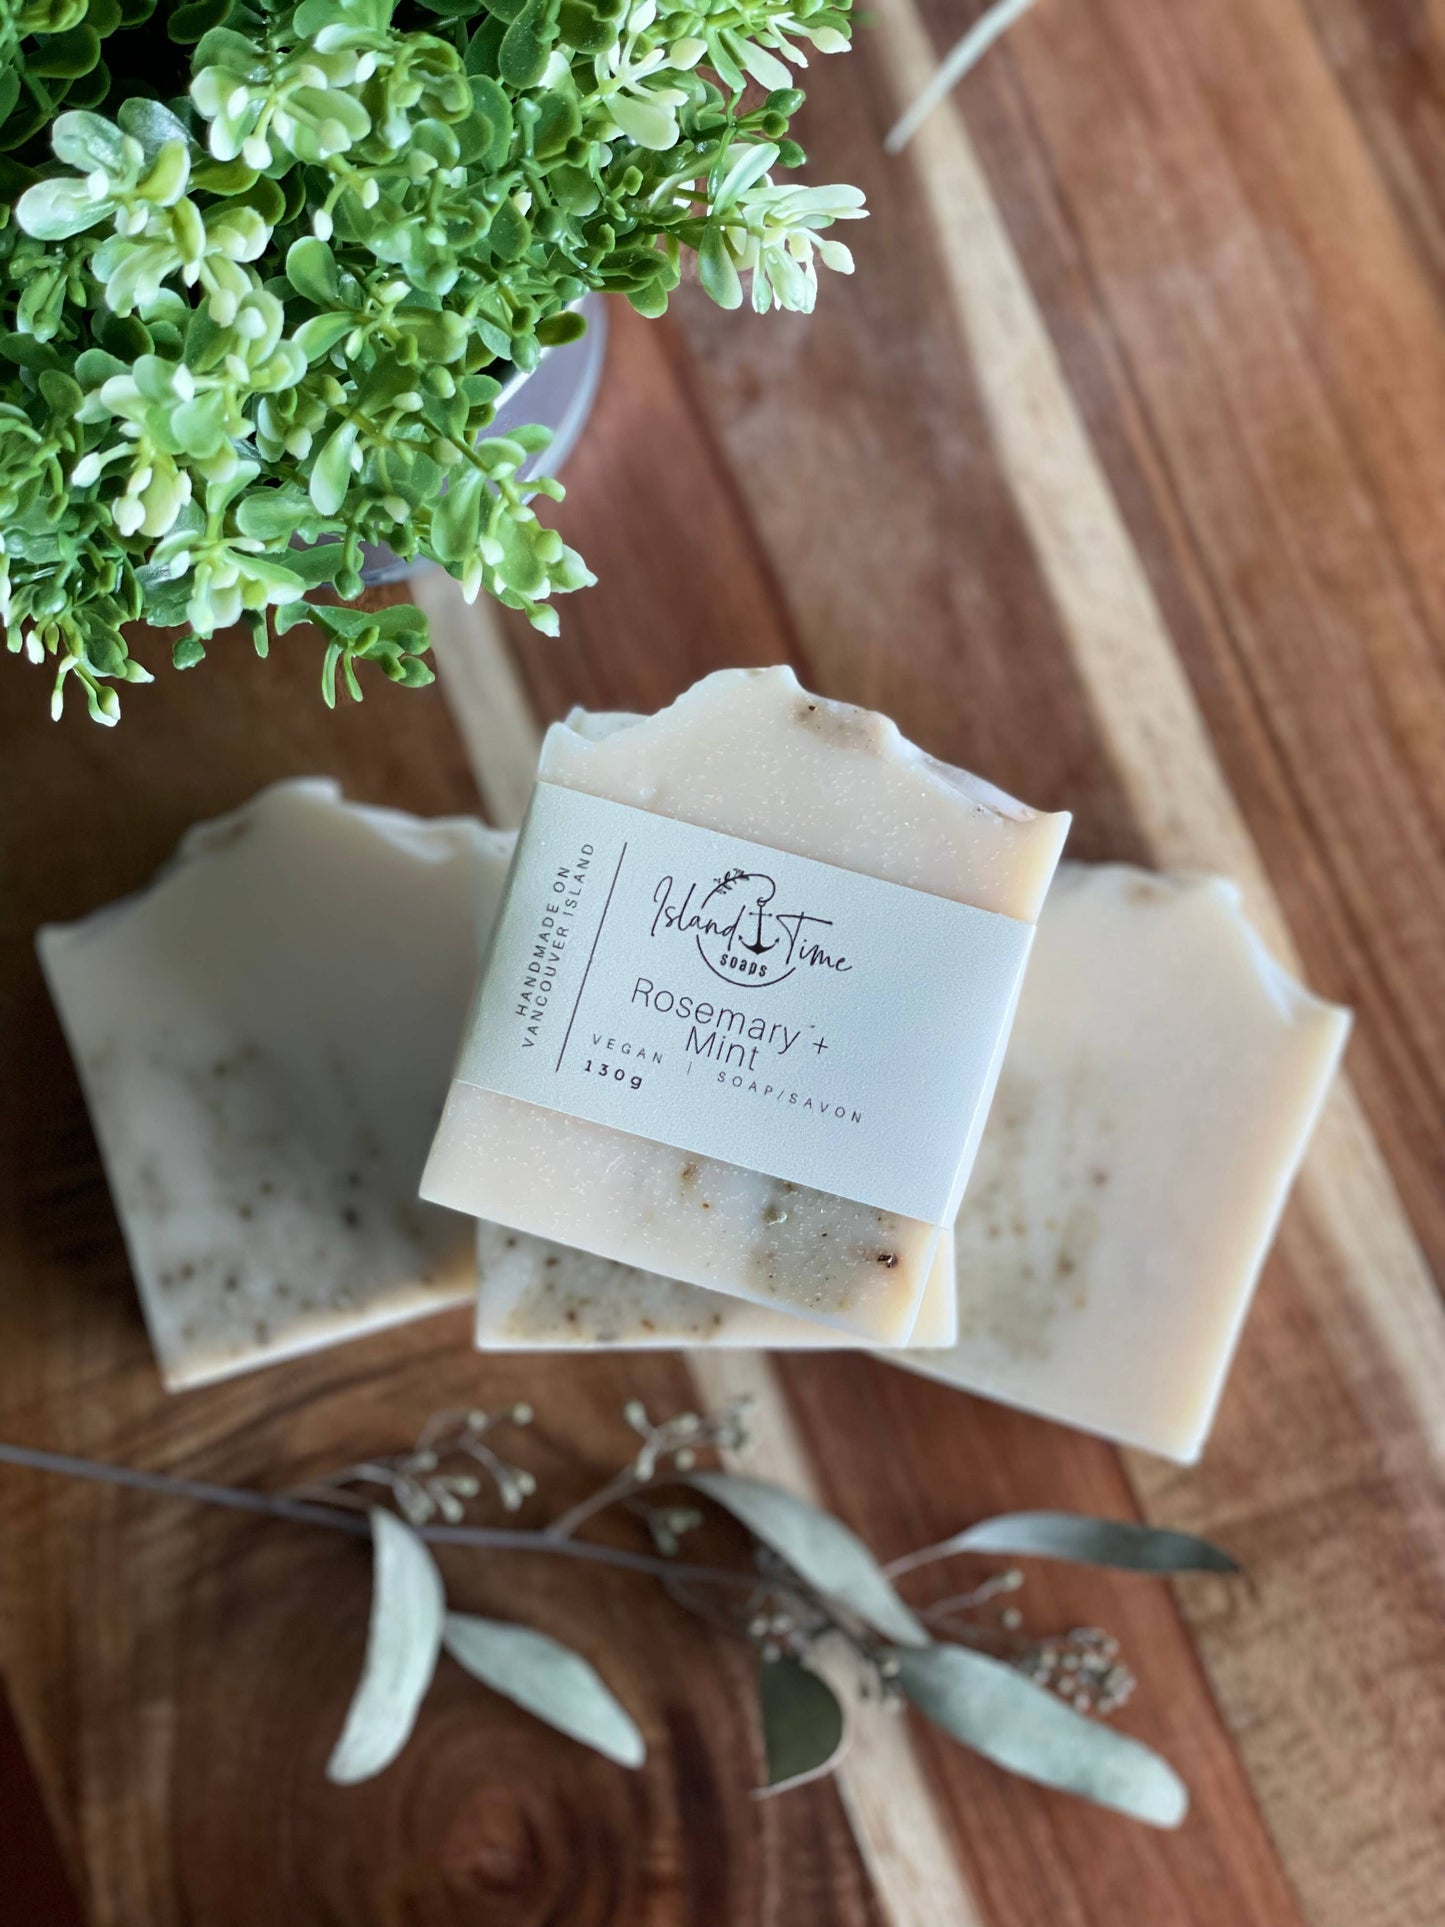 Island Time Soap + Candle - All Natural Rosemary + Mint Handmade Artisan Soap